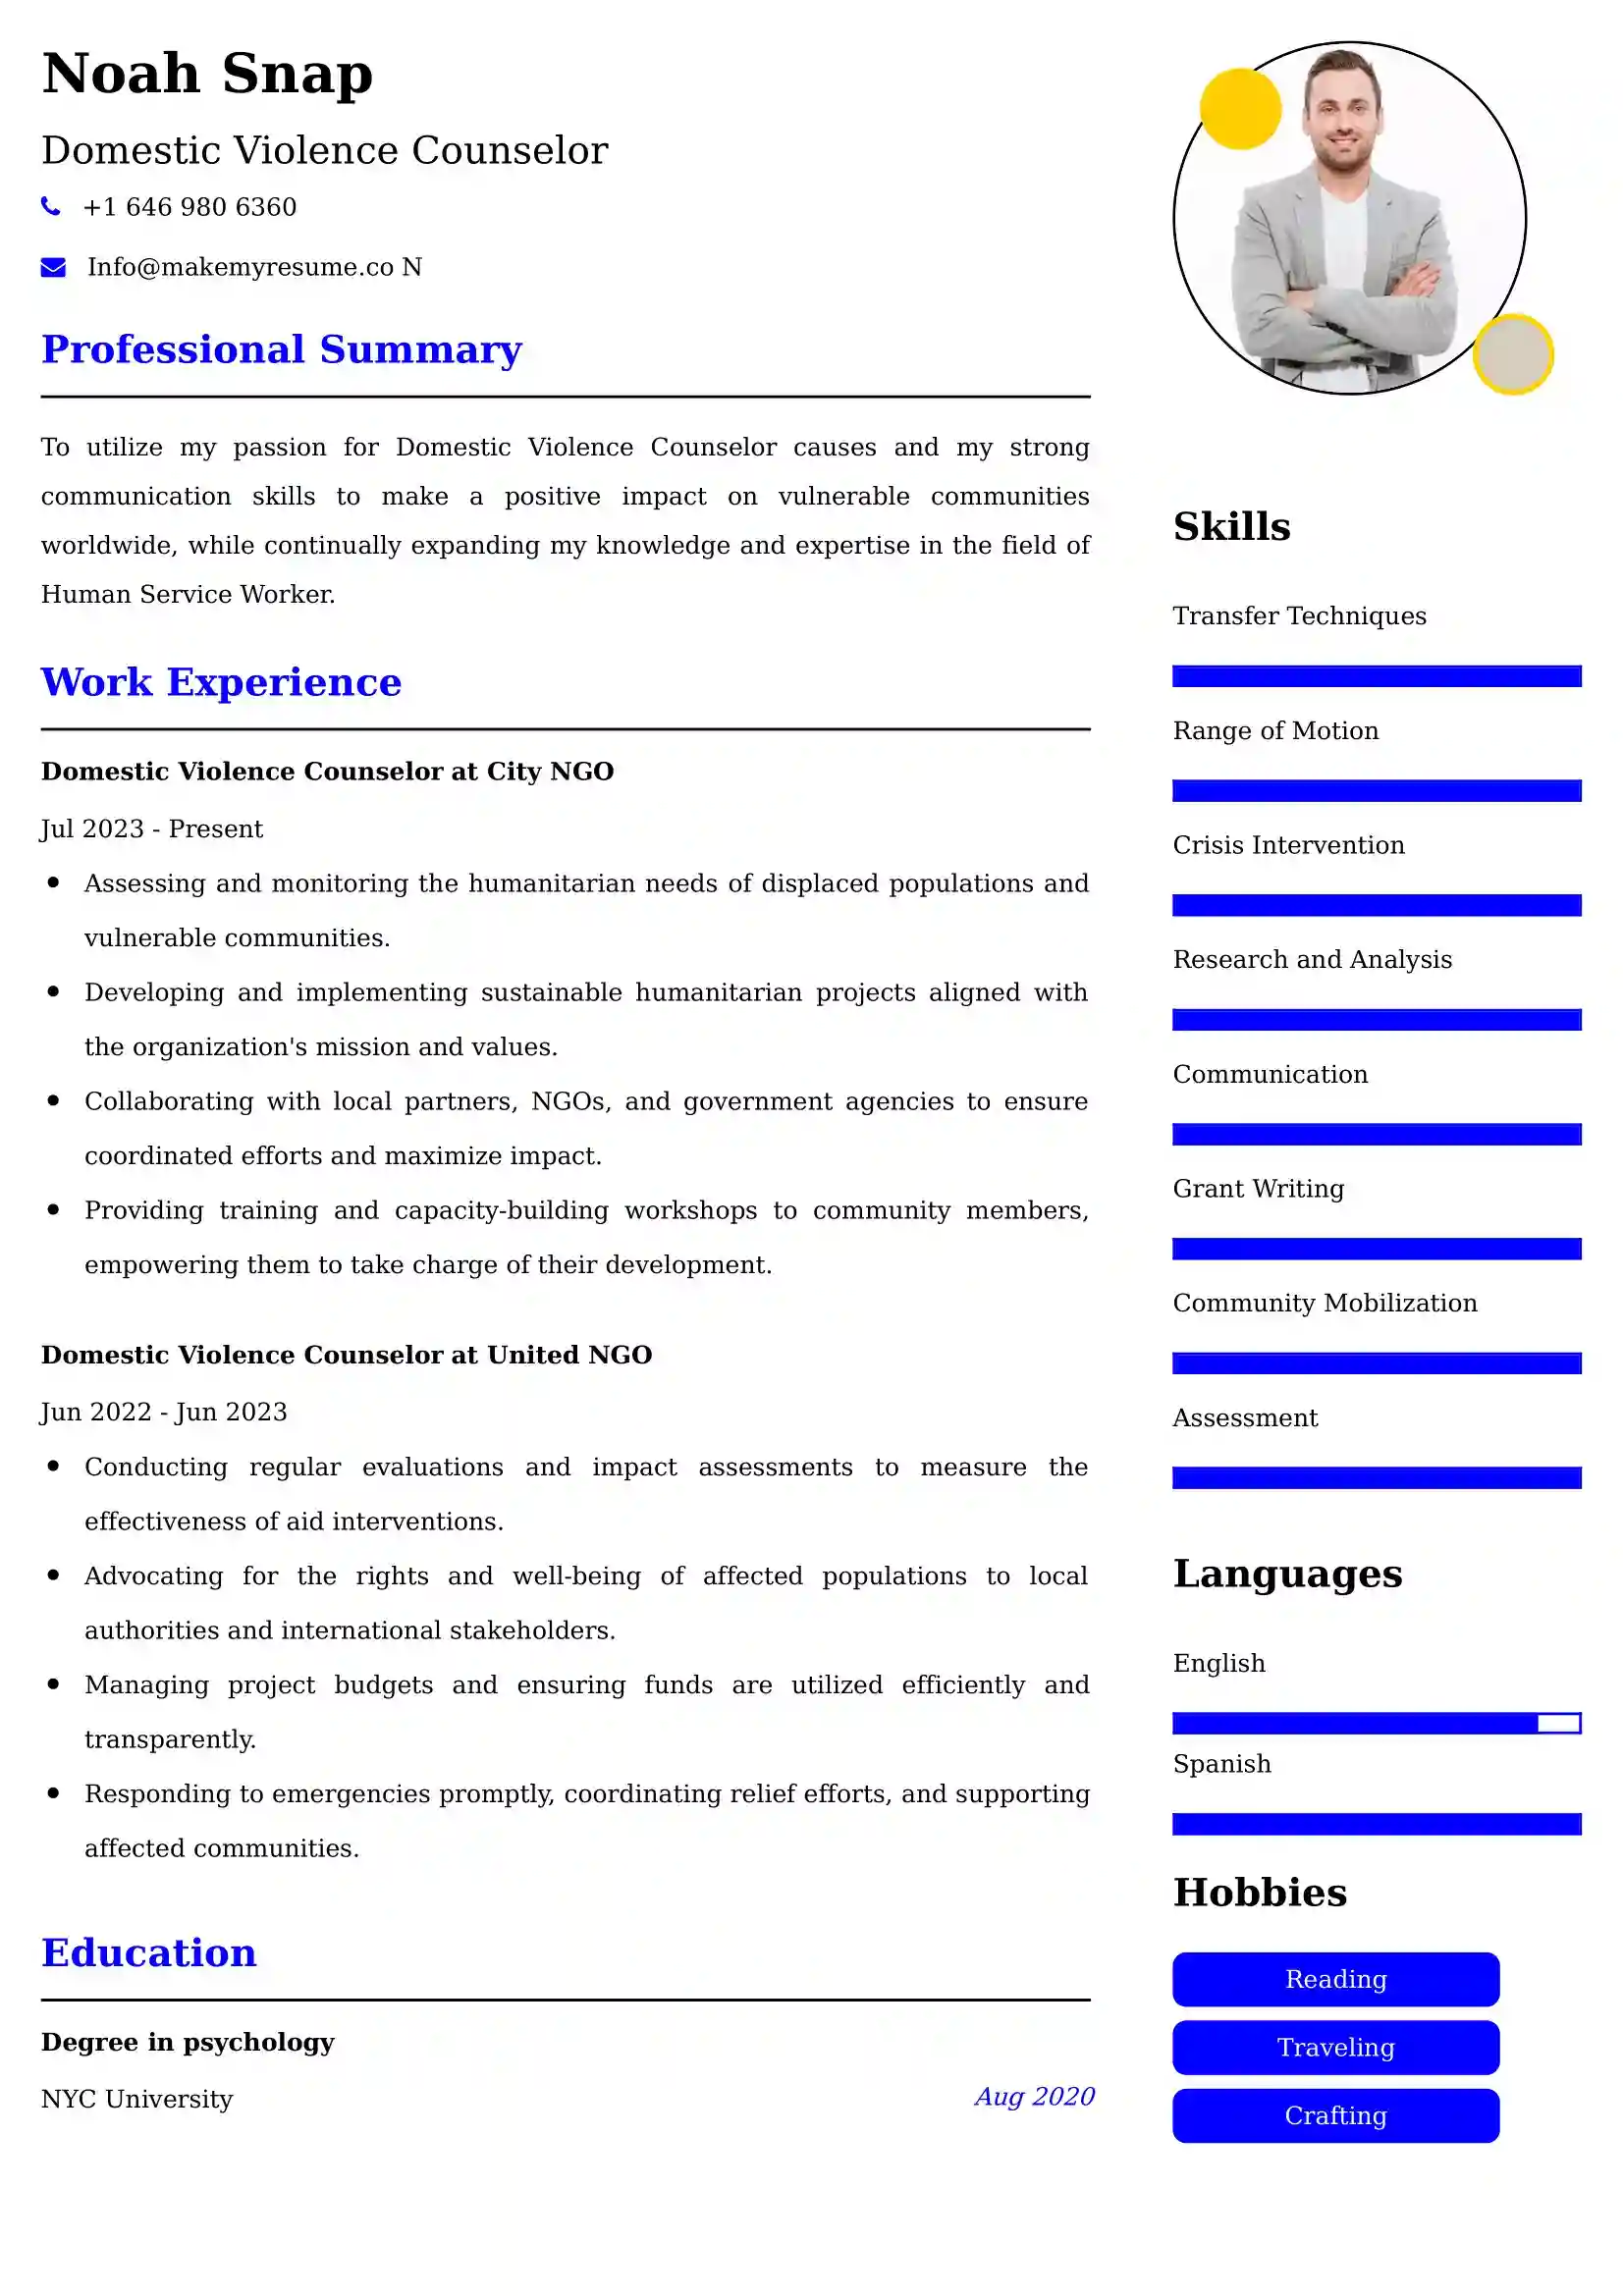 Domestic Violence Counselor Resume Examples - UK Format, Latest Template.